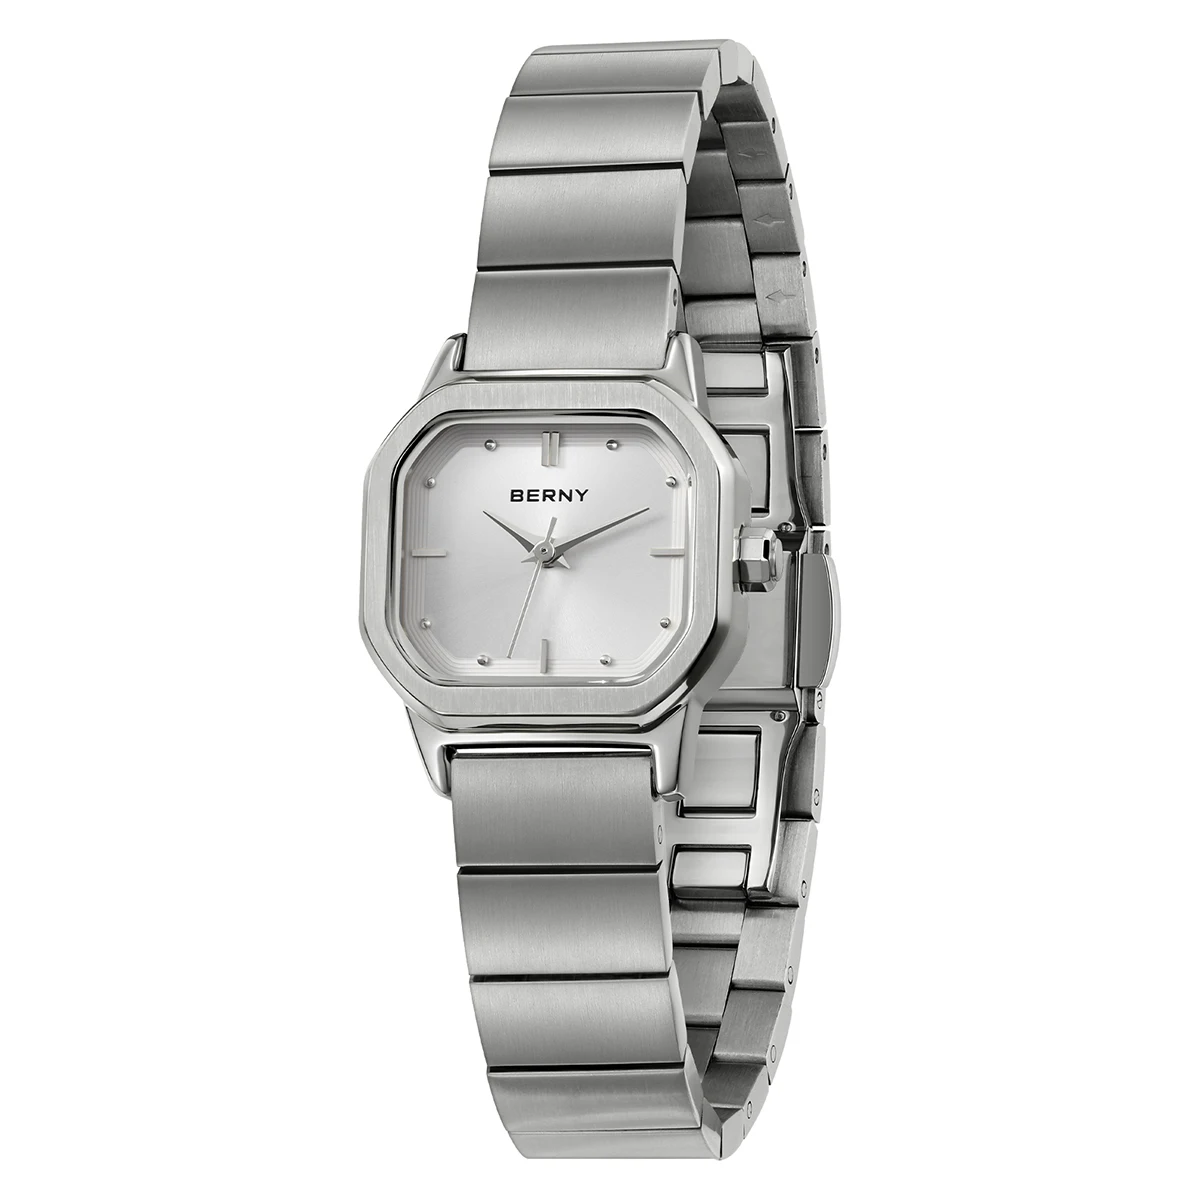 

BERNY Watch for Women Silver Full Stainless Steel Square Small Dial Quartz Women's Wristwatch Waterproof Dress Ladies Watches